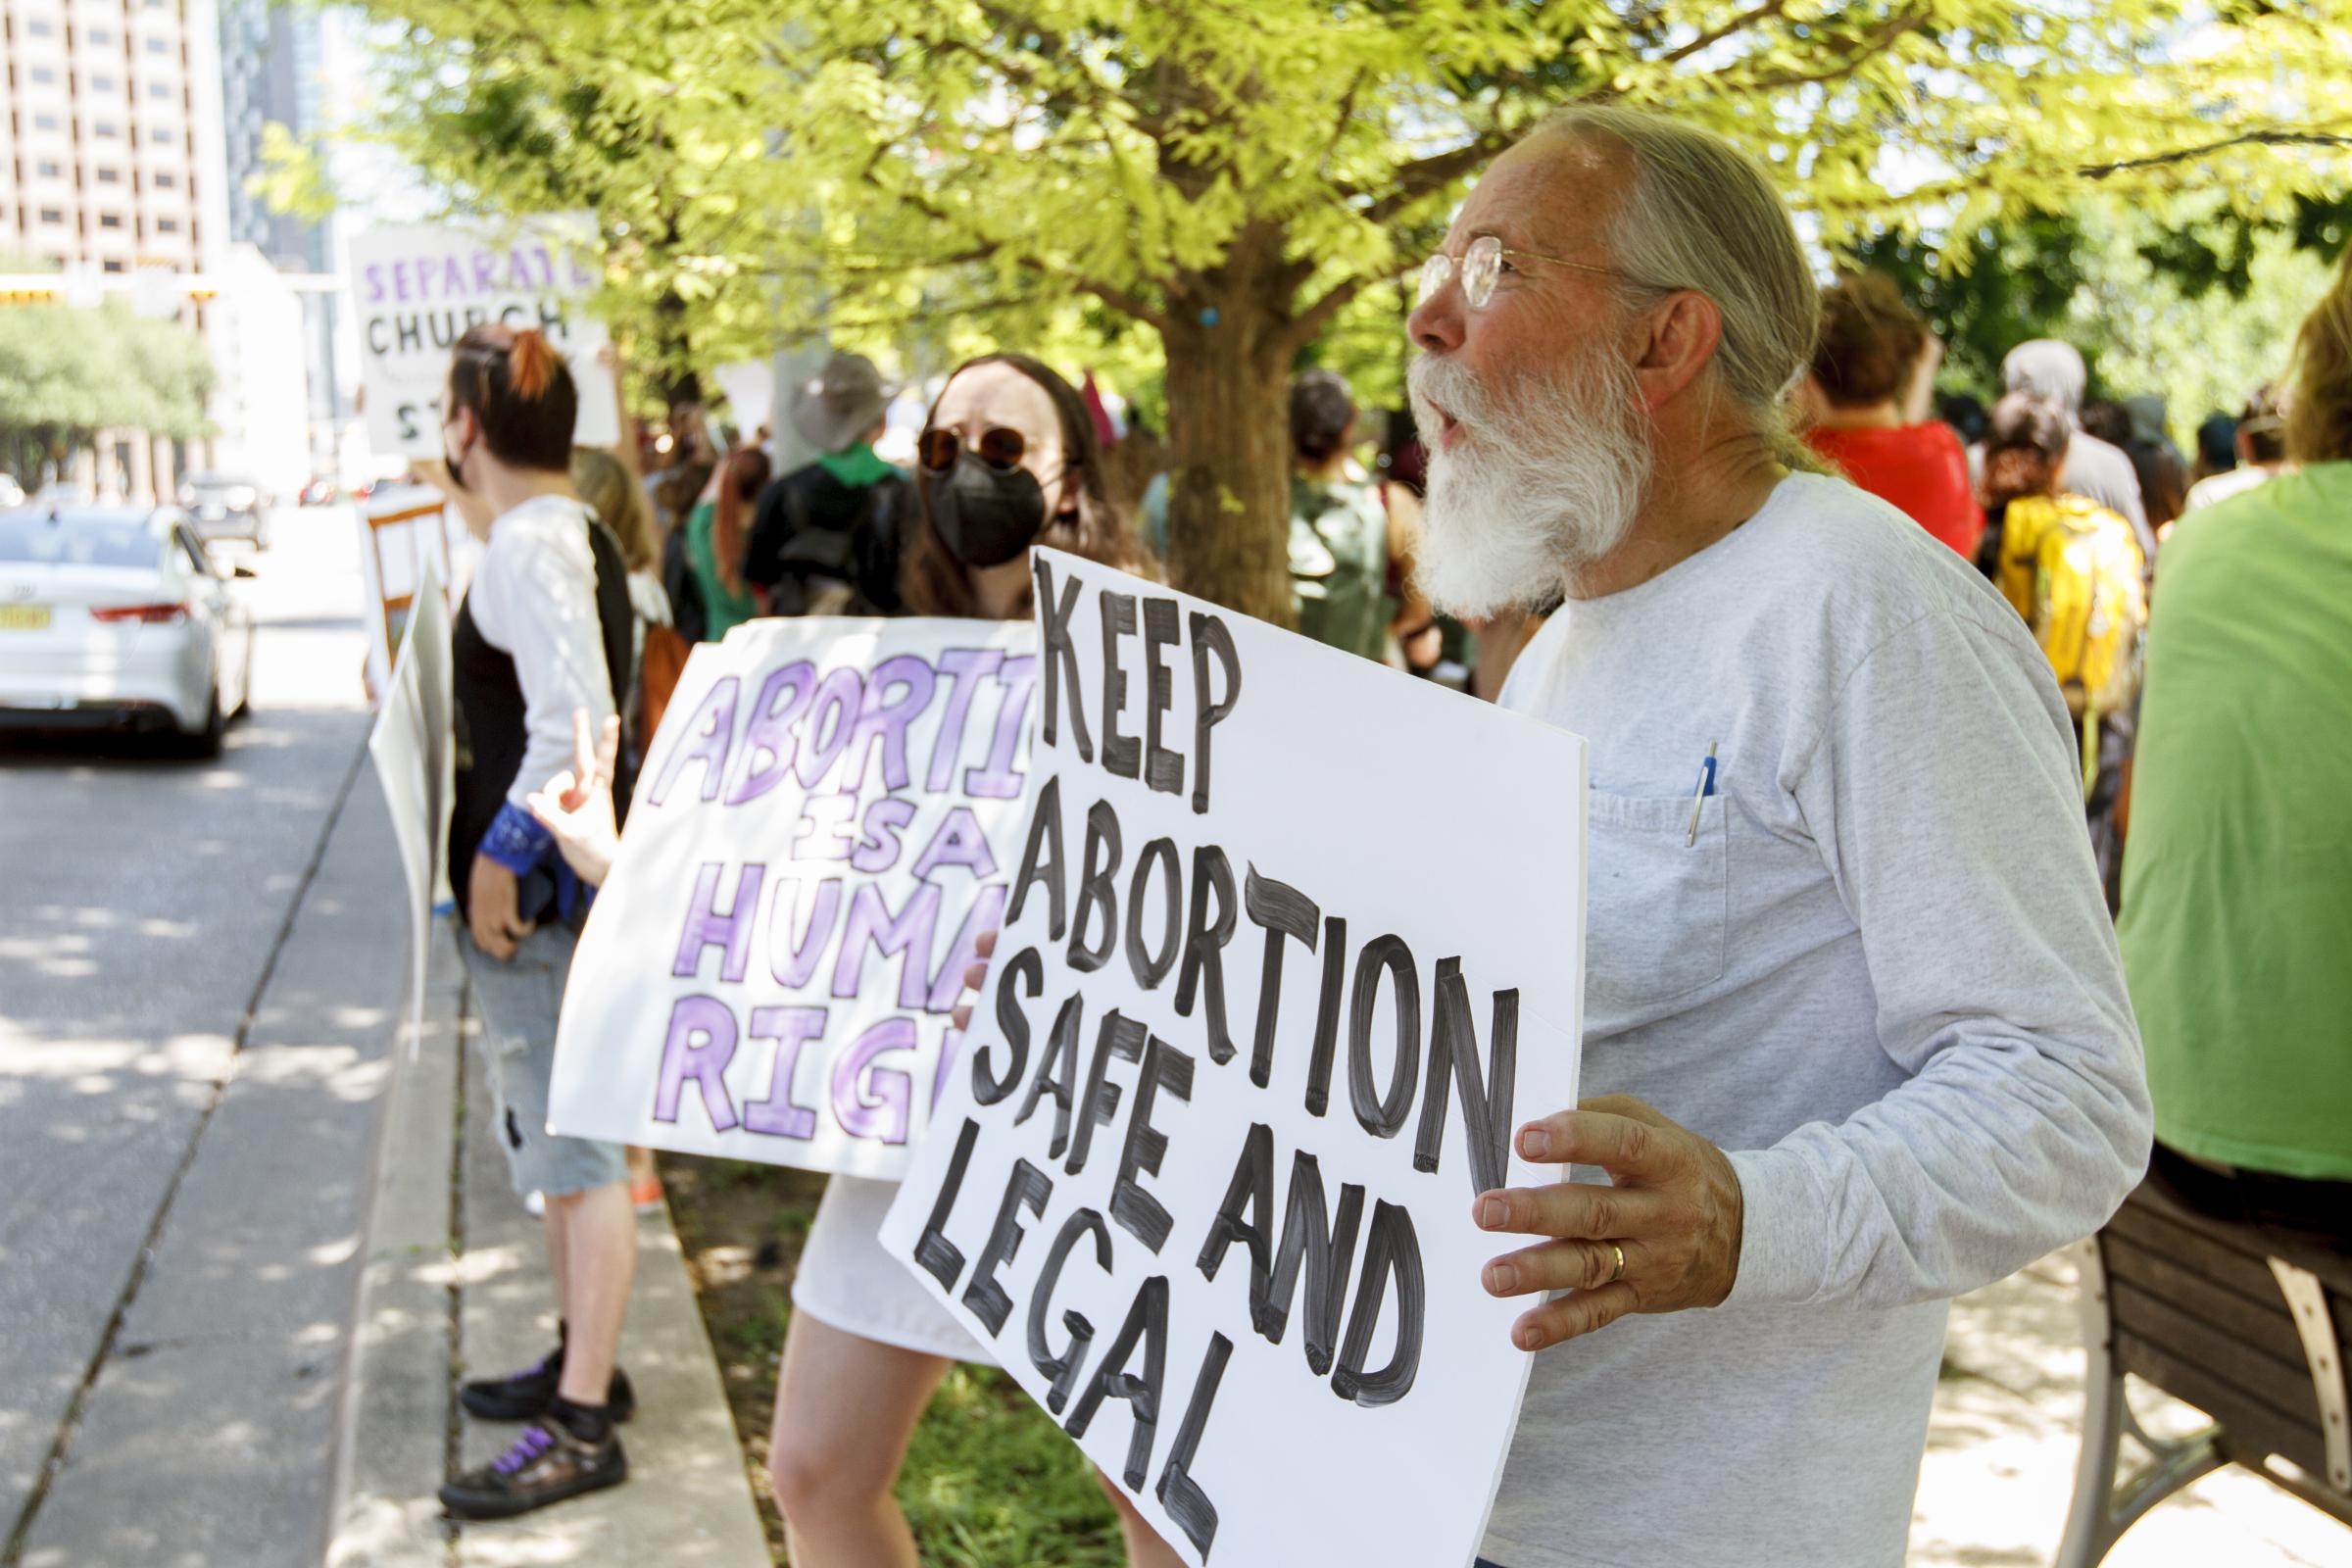 Abortion Rights Protest Austin Texas - Abortion Rights protestors gather at Buford Tower on Cesar Chavez Street in Austin Texas to...